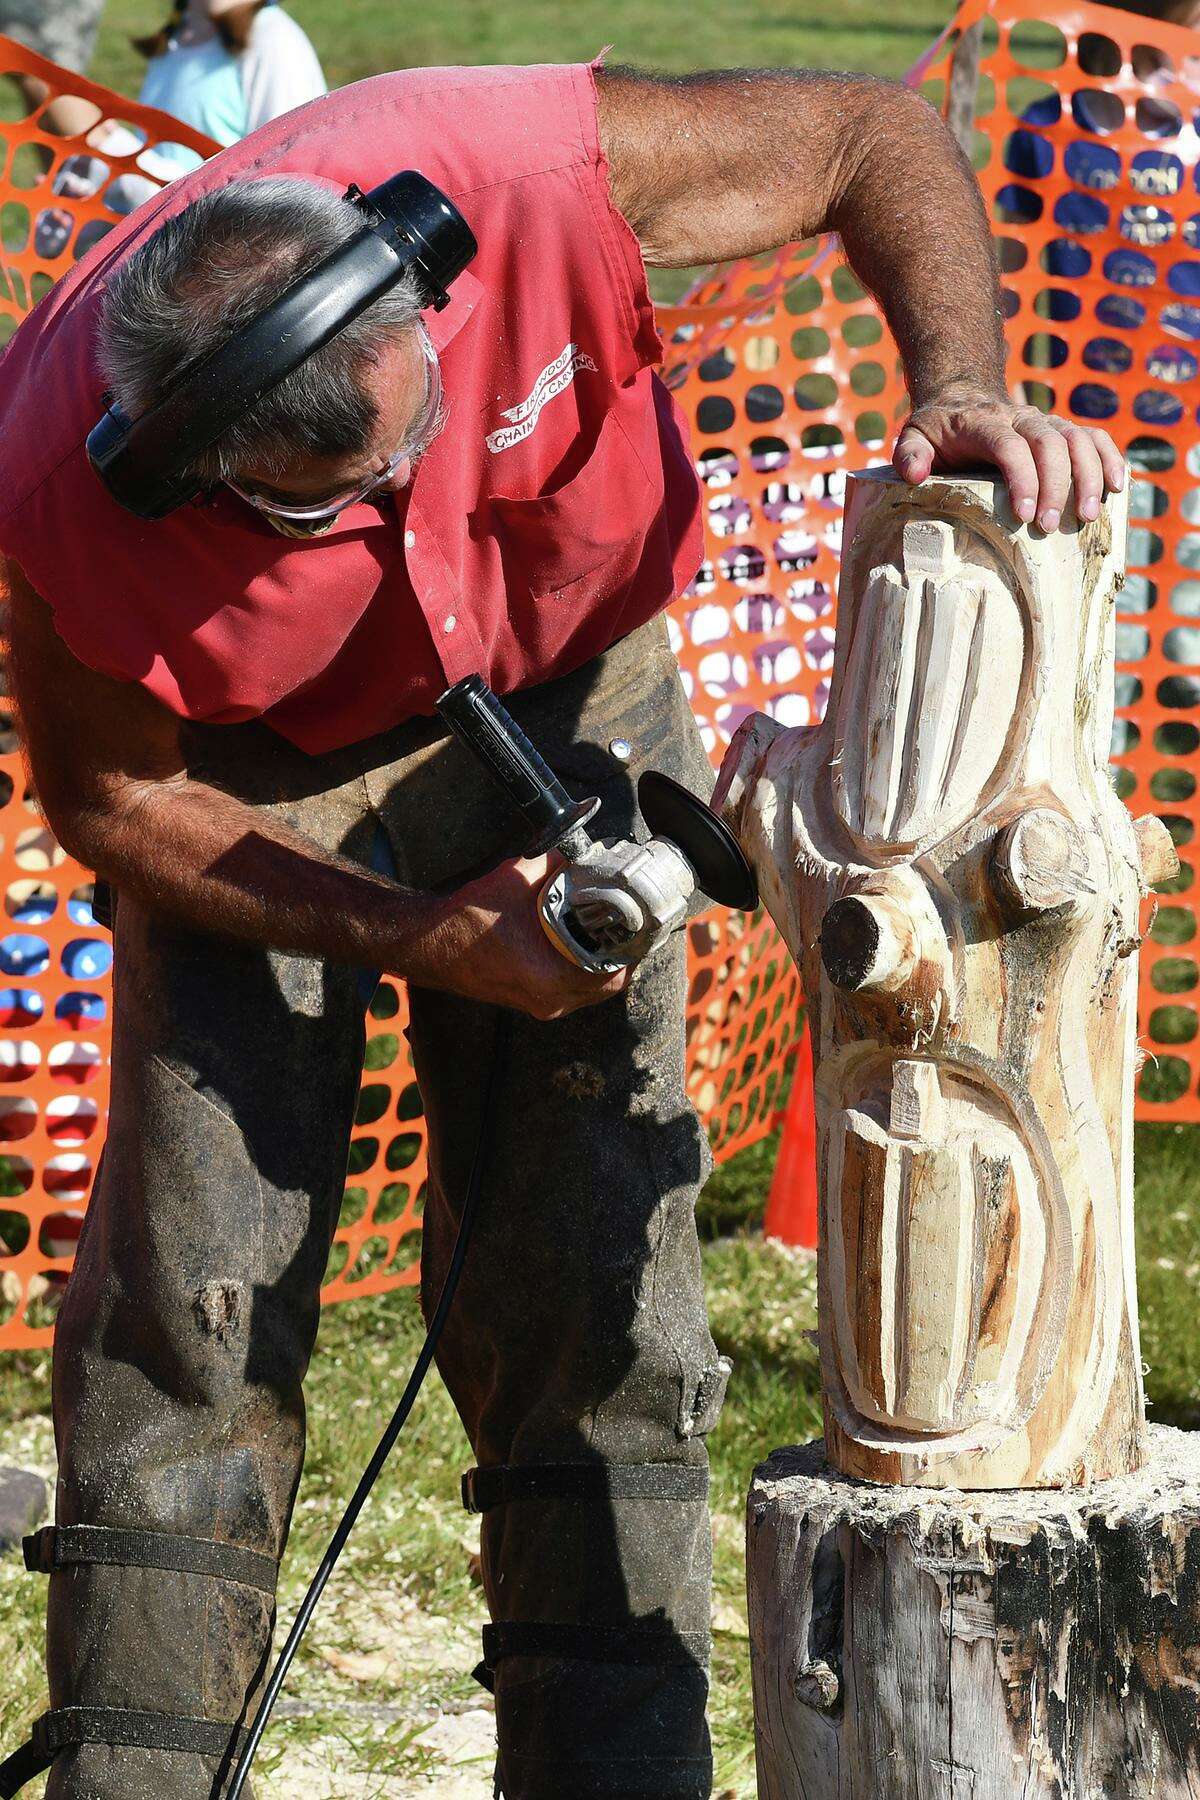 A wood artist creates a sculpture during the 2021 Harwinton Fair, which returns for its 165th year, Sept. 30-Oct. 1. The fairgrounds are located on Locust Road, Harwinton. 